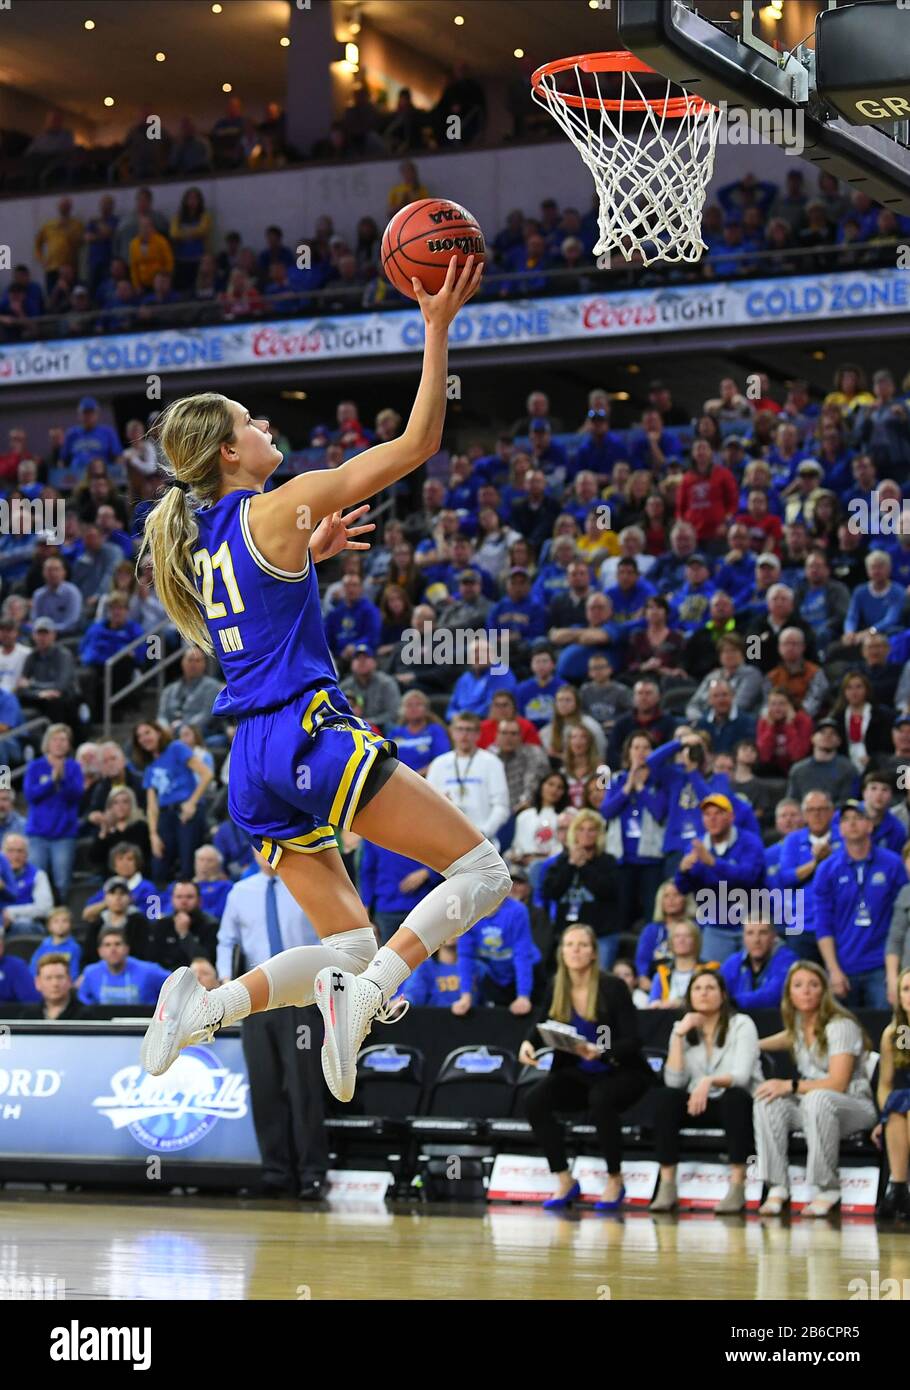 March 10, 2020: South Dakota State Jackrabbits guard Tylee Irwin (21) goes up for a shot during the Summit League women's championship basketball game between the South Dakota State Jackrabbits and the South Dakota Coyotes at the Denny Sanford Premier Center, Sioux Falls, SD. South Dakota defeated South Dakota State 63-58 and move on to the NCAA tournament. Photo by Russell Hons/CSM Stock Photo